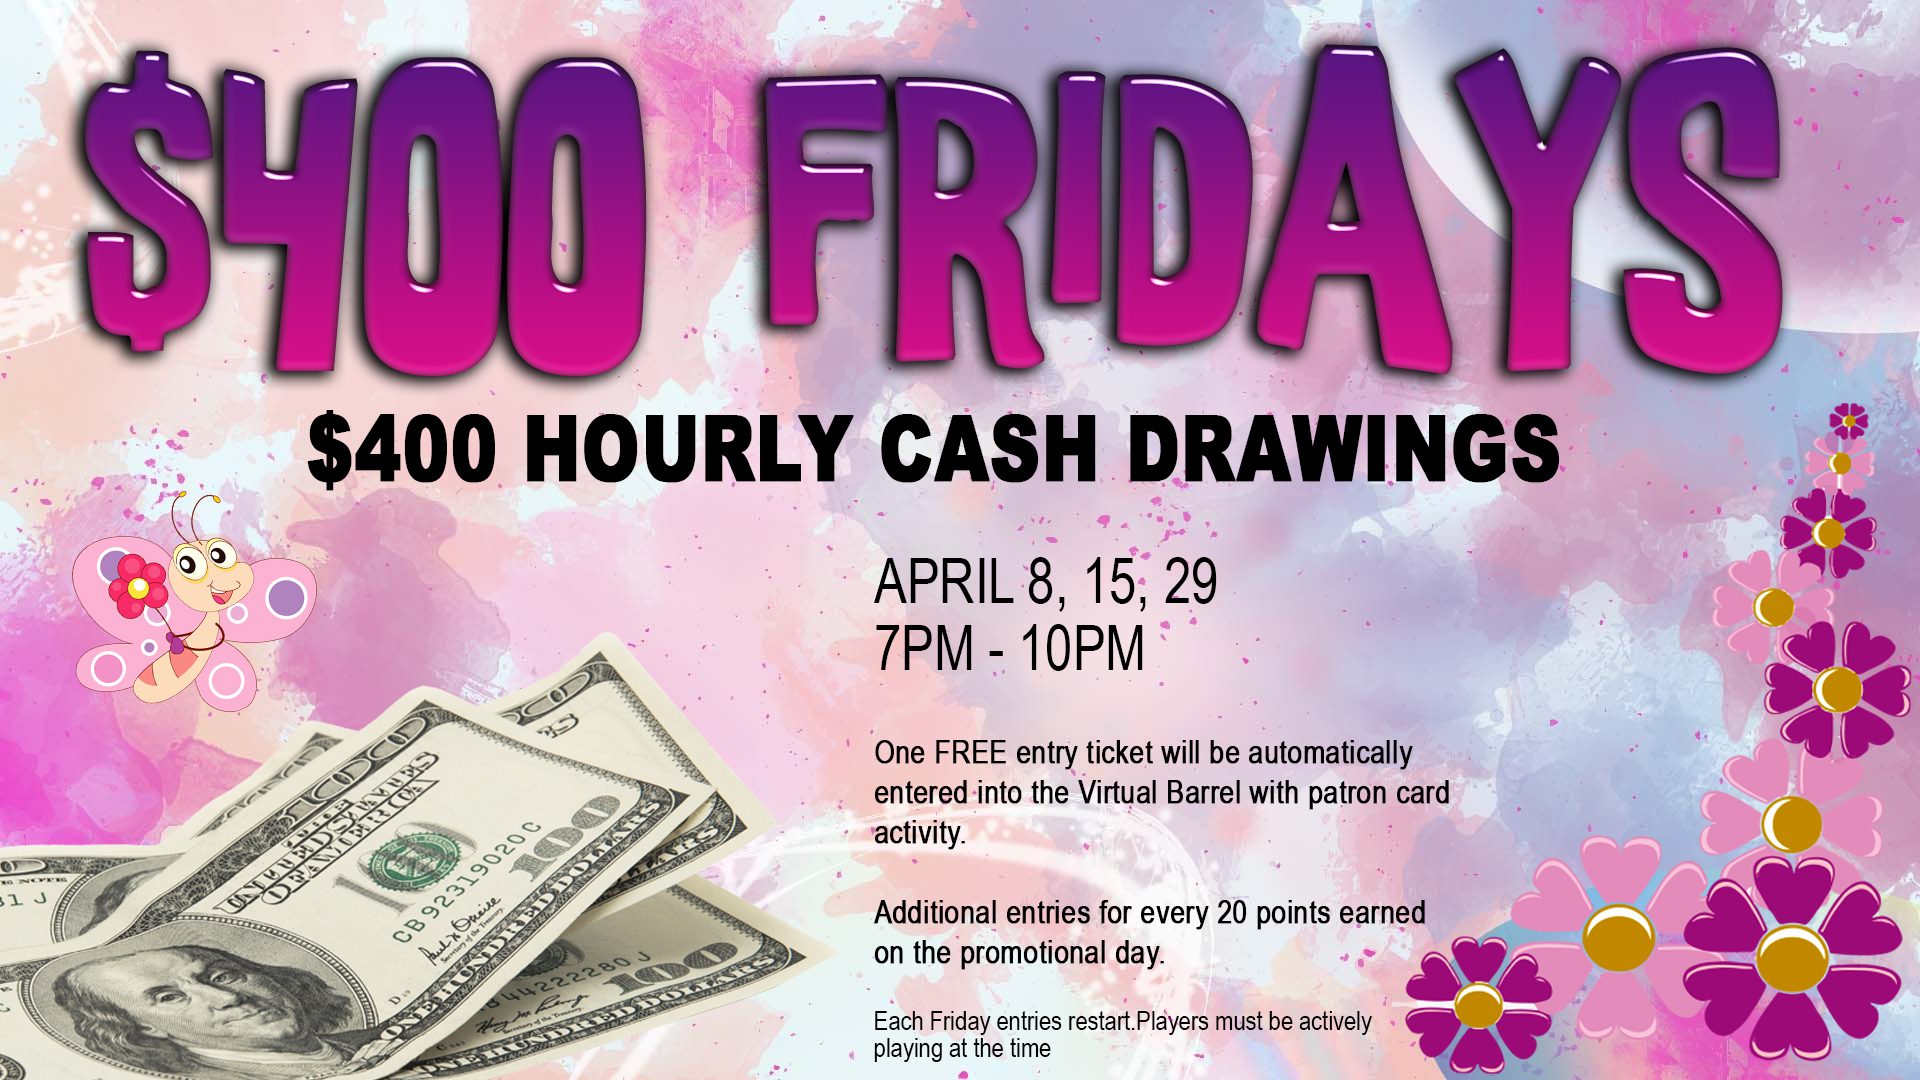 Colorful promotional banner announcing "$400 fridays" with details of hourly cash drawings and dates.